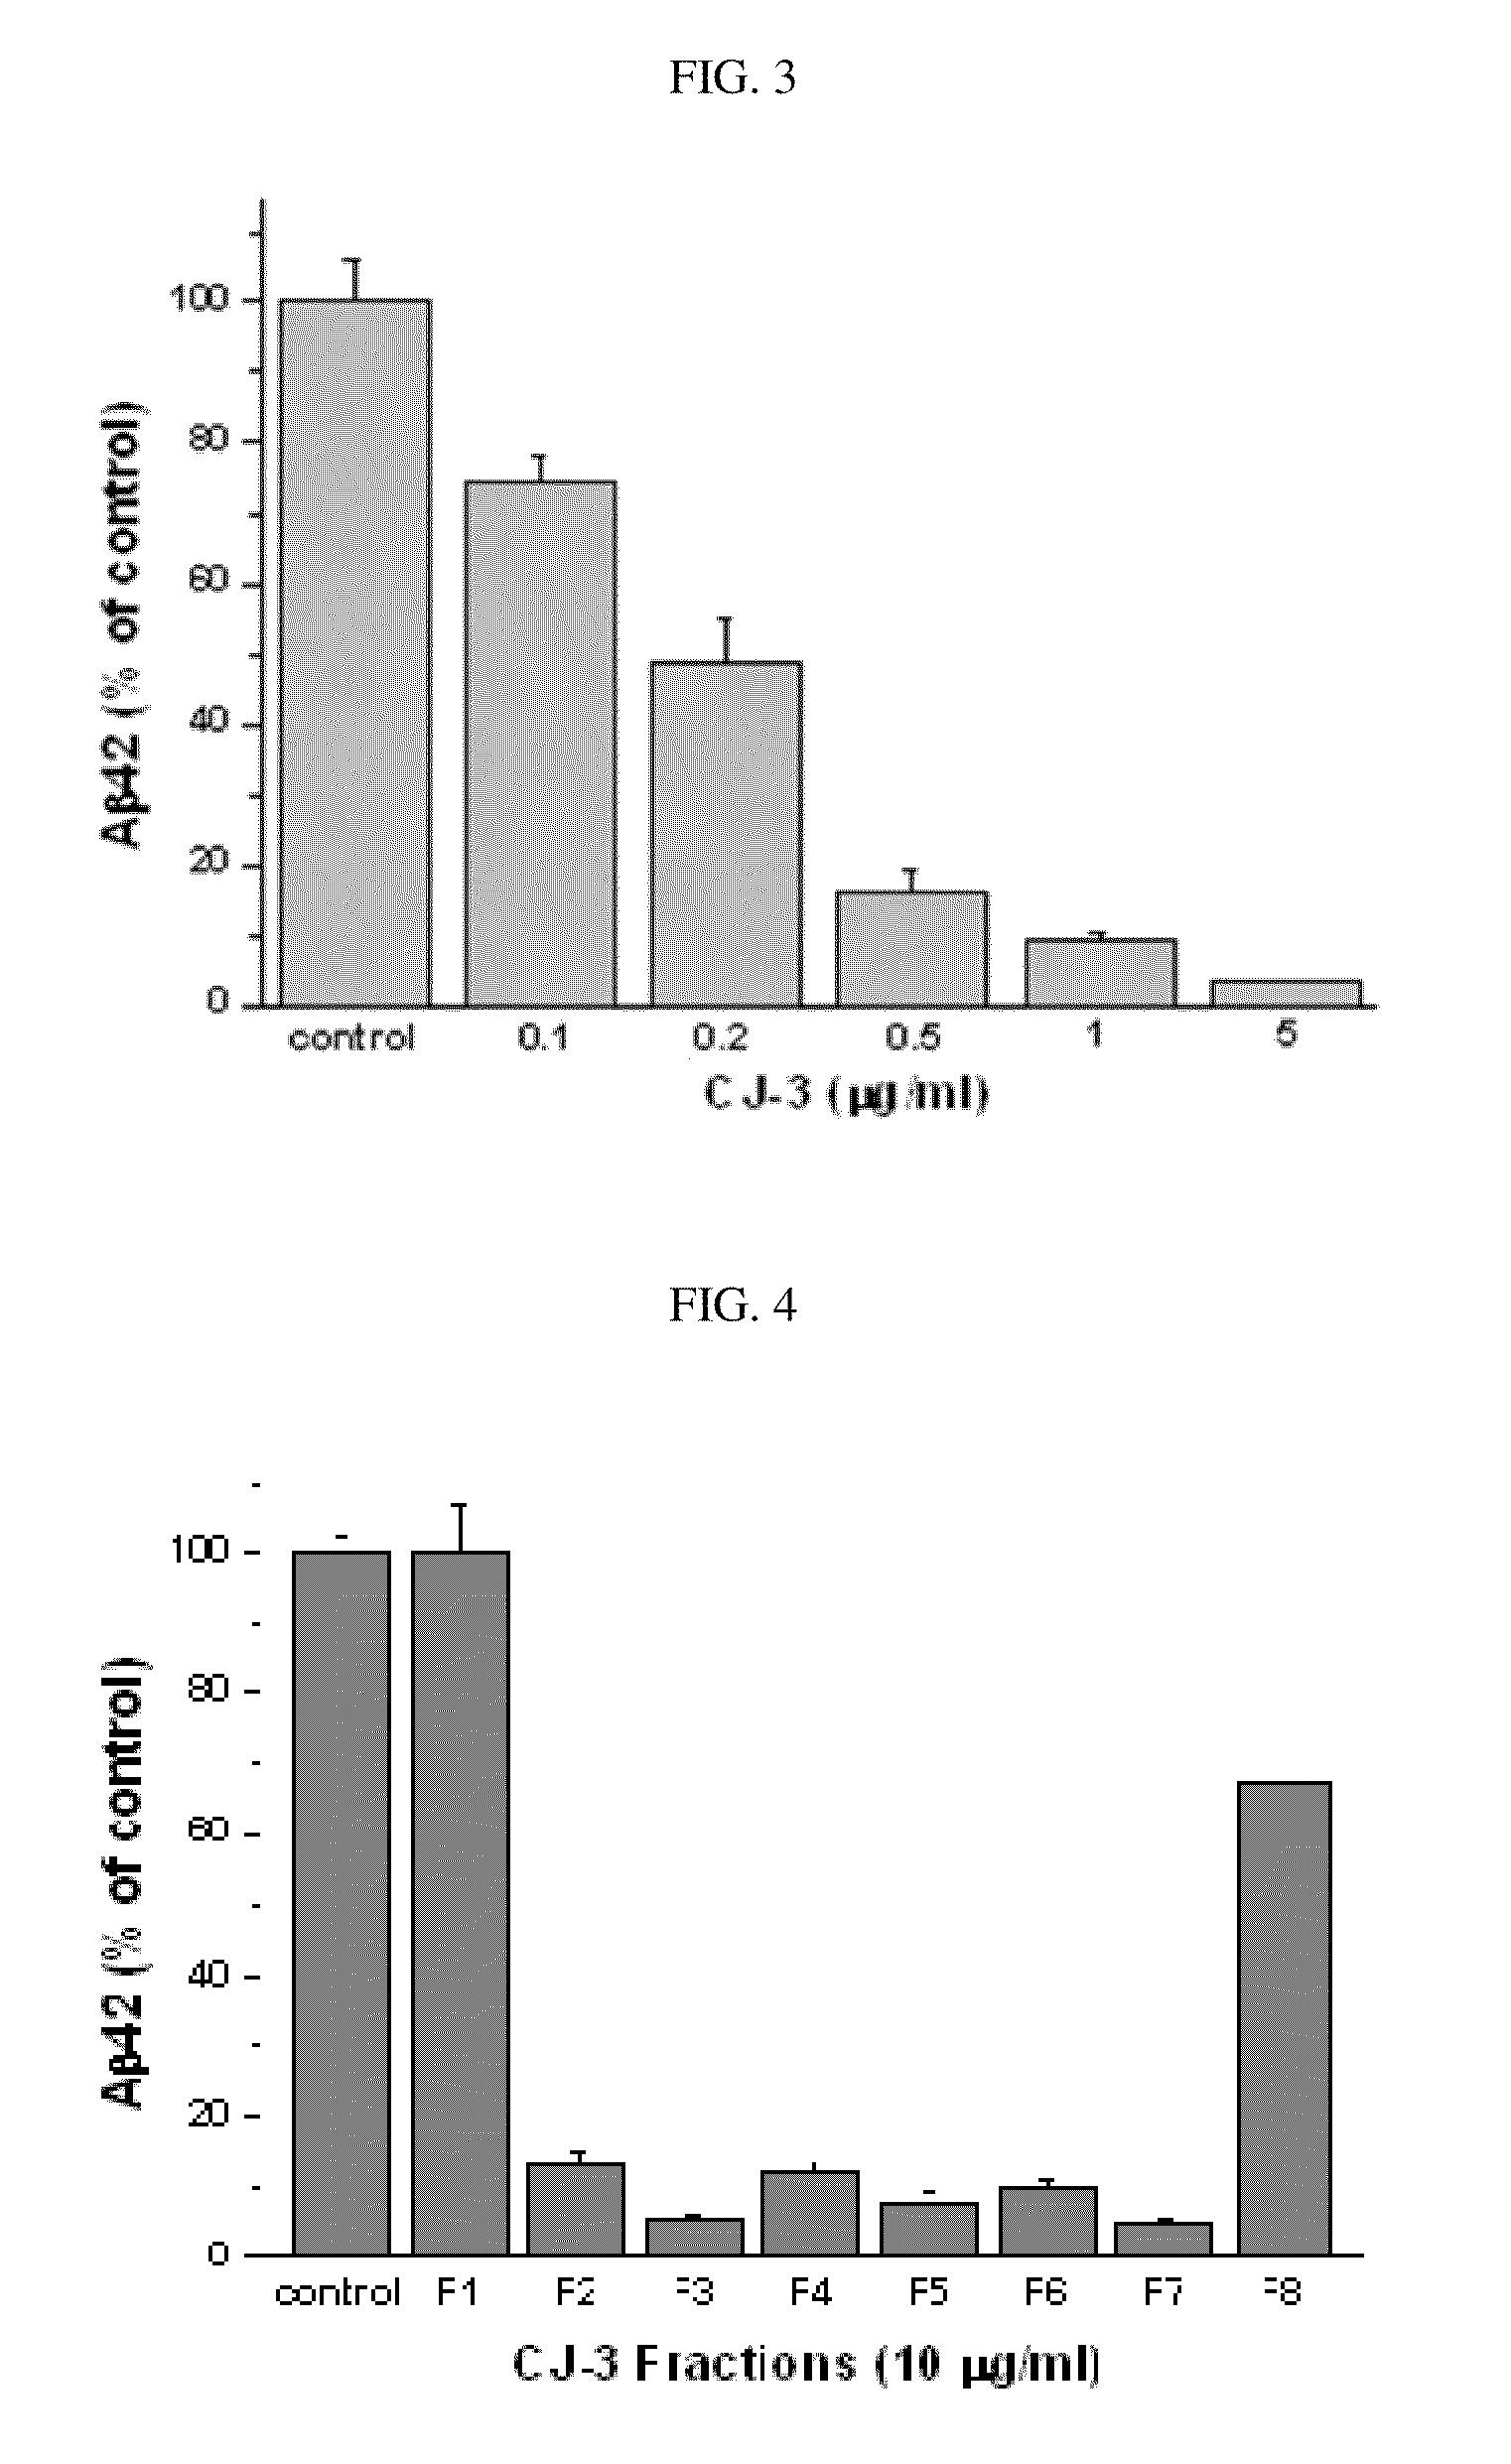 Method of preventing and/or treating a neurodegenerative disease by administering an extract of Lycoris chejuensis and/or a compound isolated therefrom